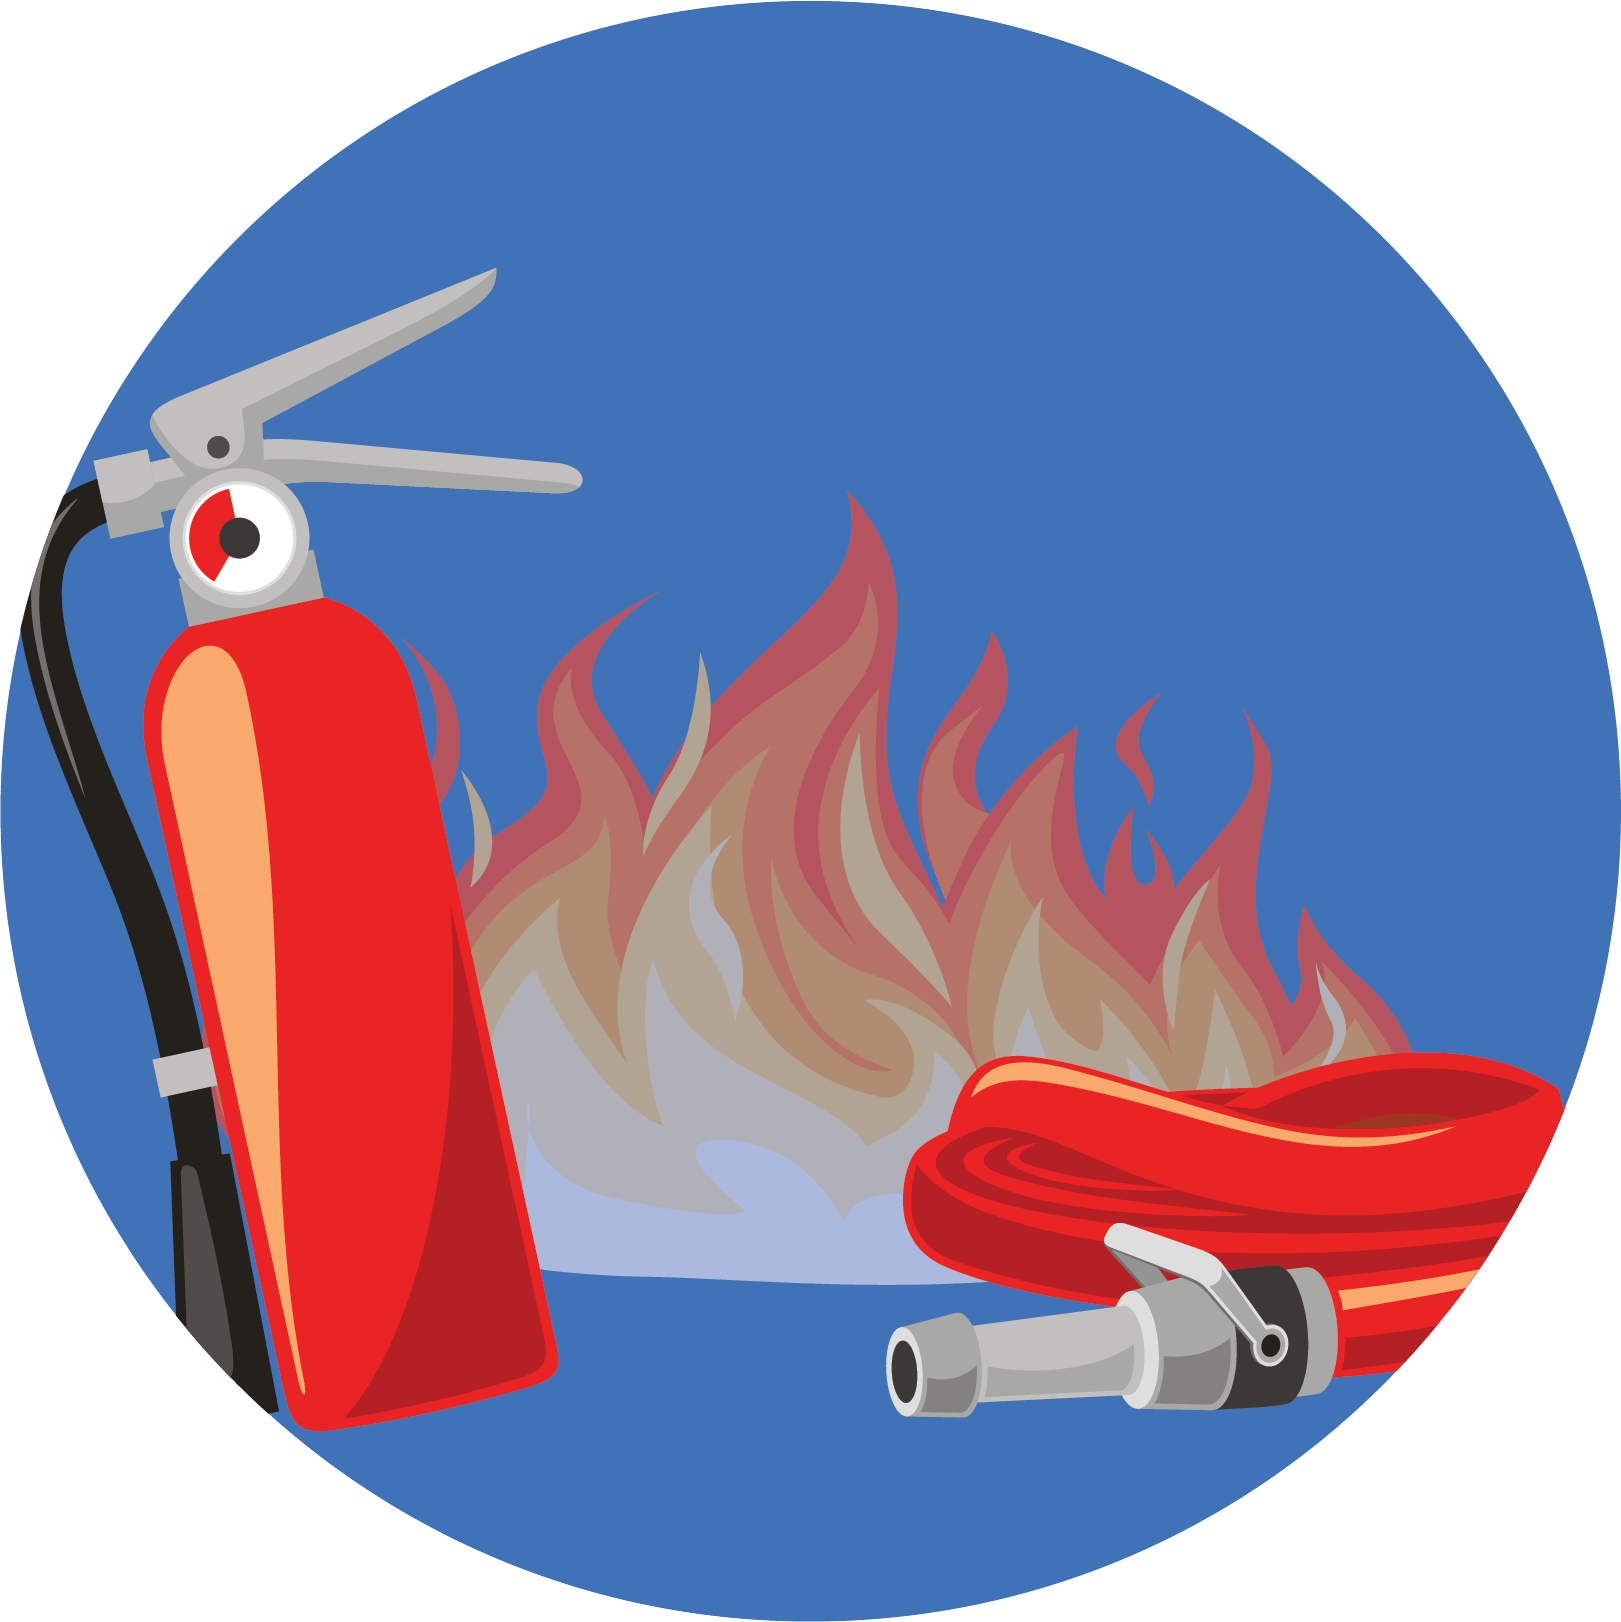 Fire extinguisher fire hose icon